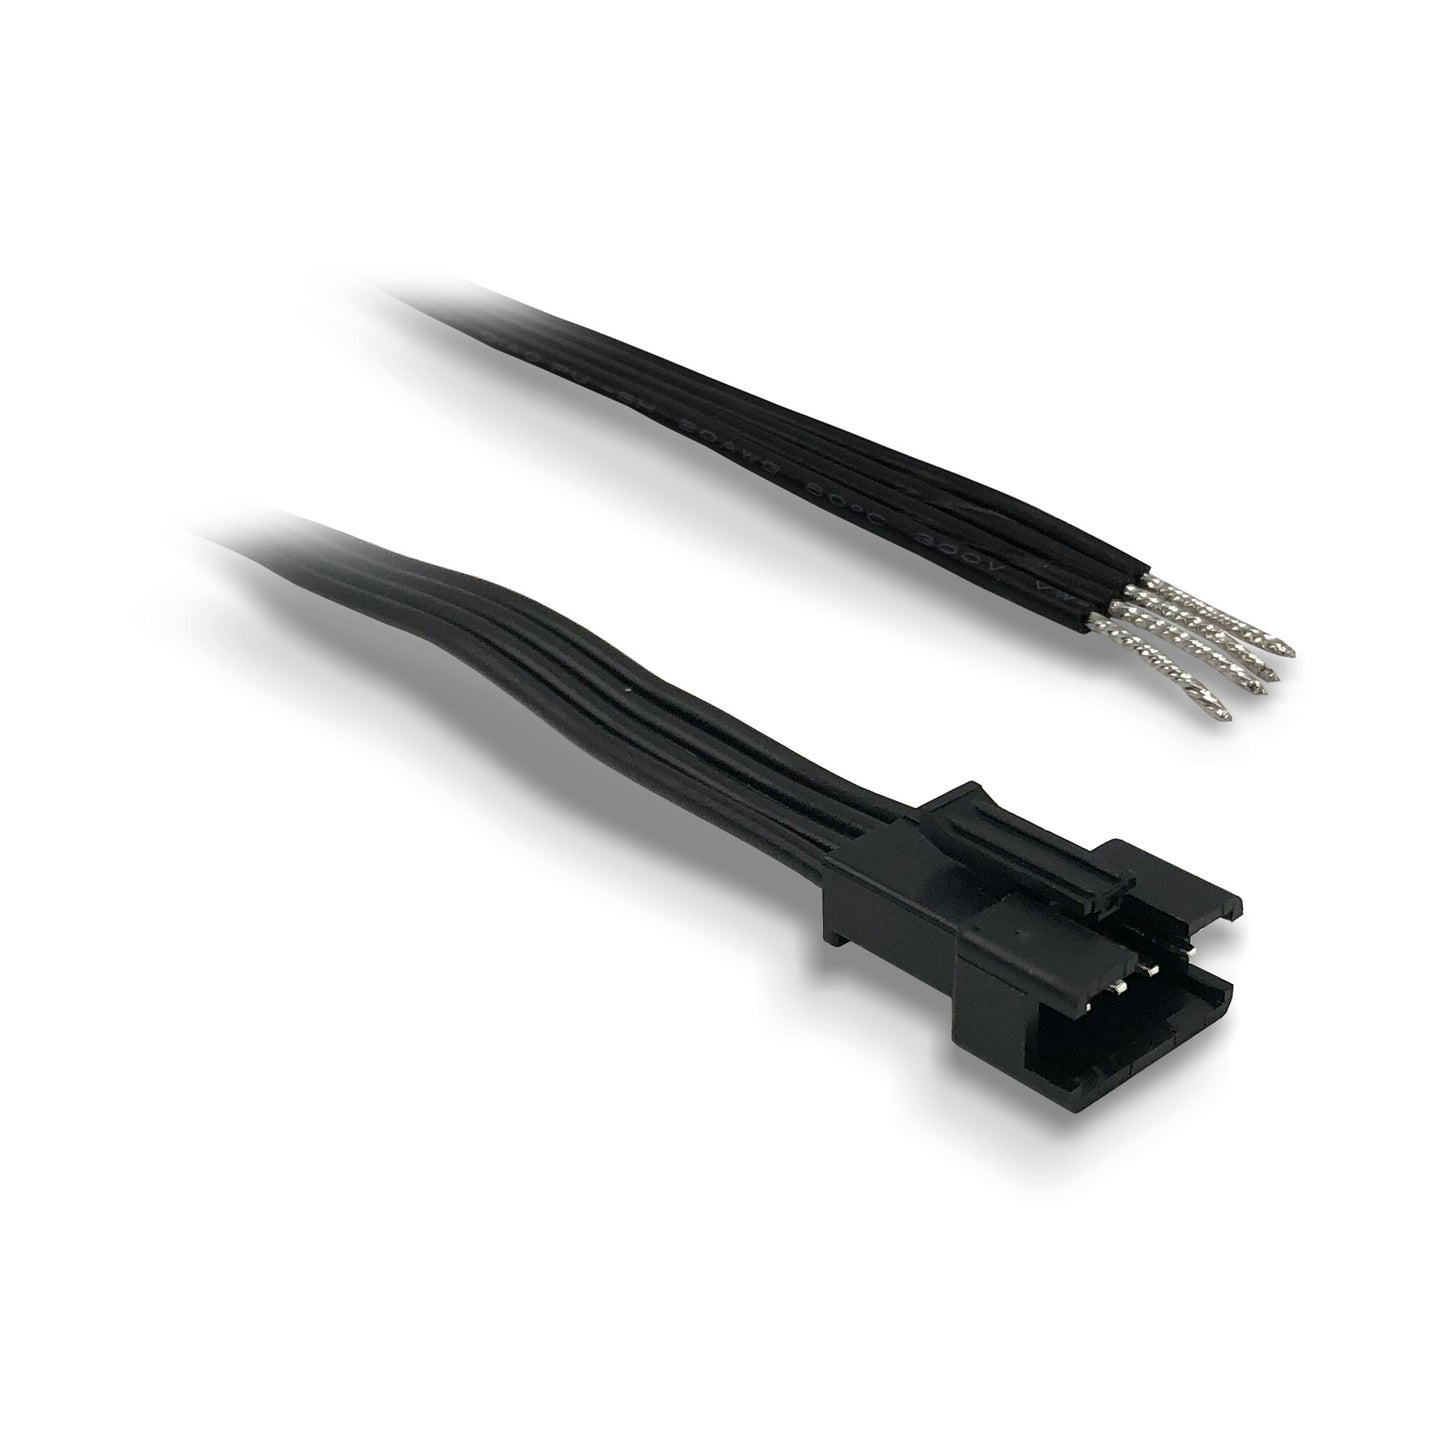 Nexmosphere RGB connection cable black, male 15cm, stripped end